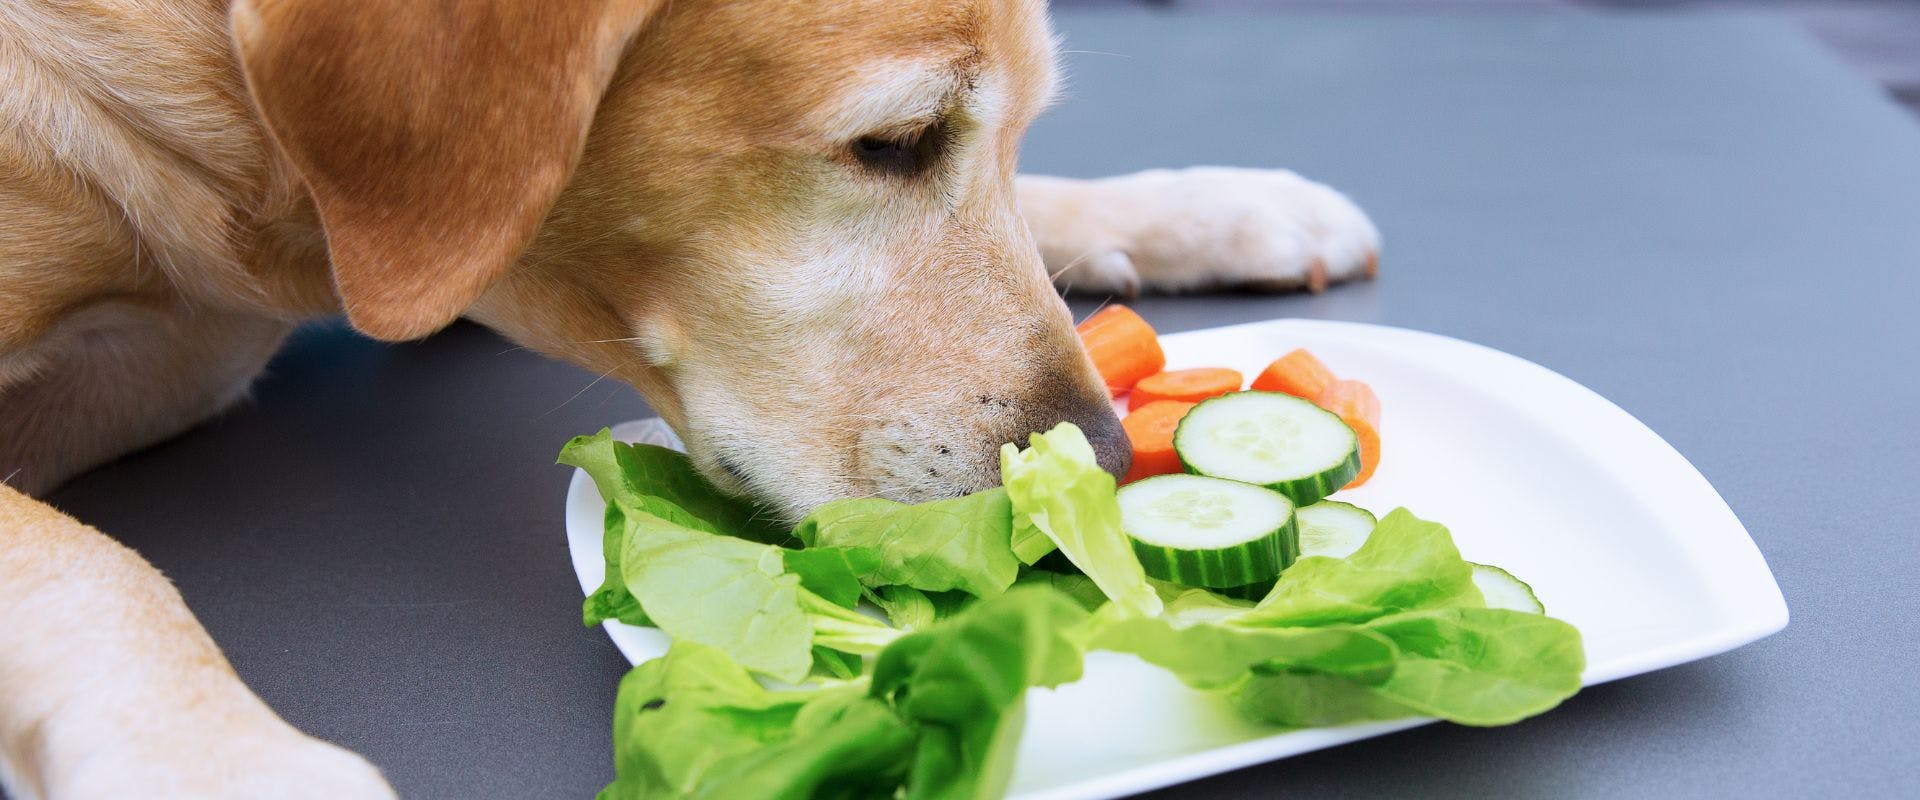 Labrador sniffing cucumber, lettuce and carrot